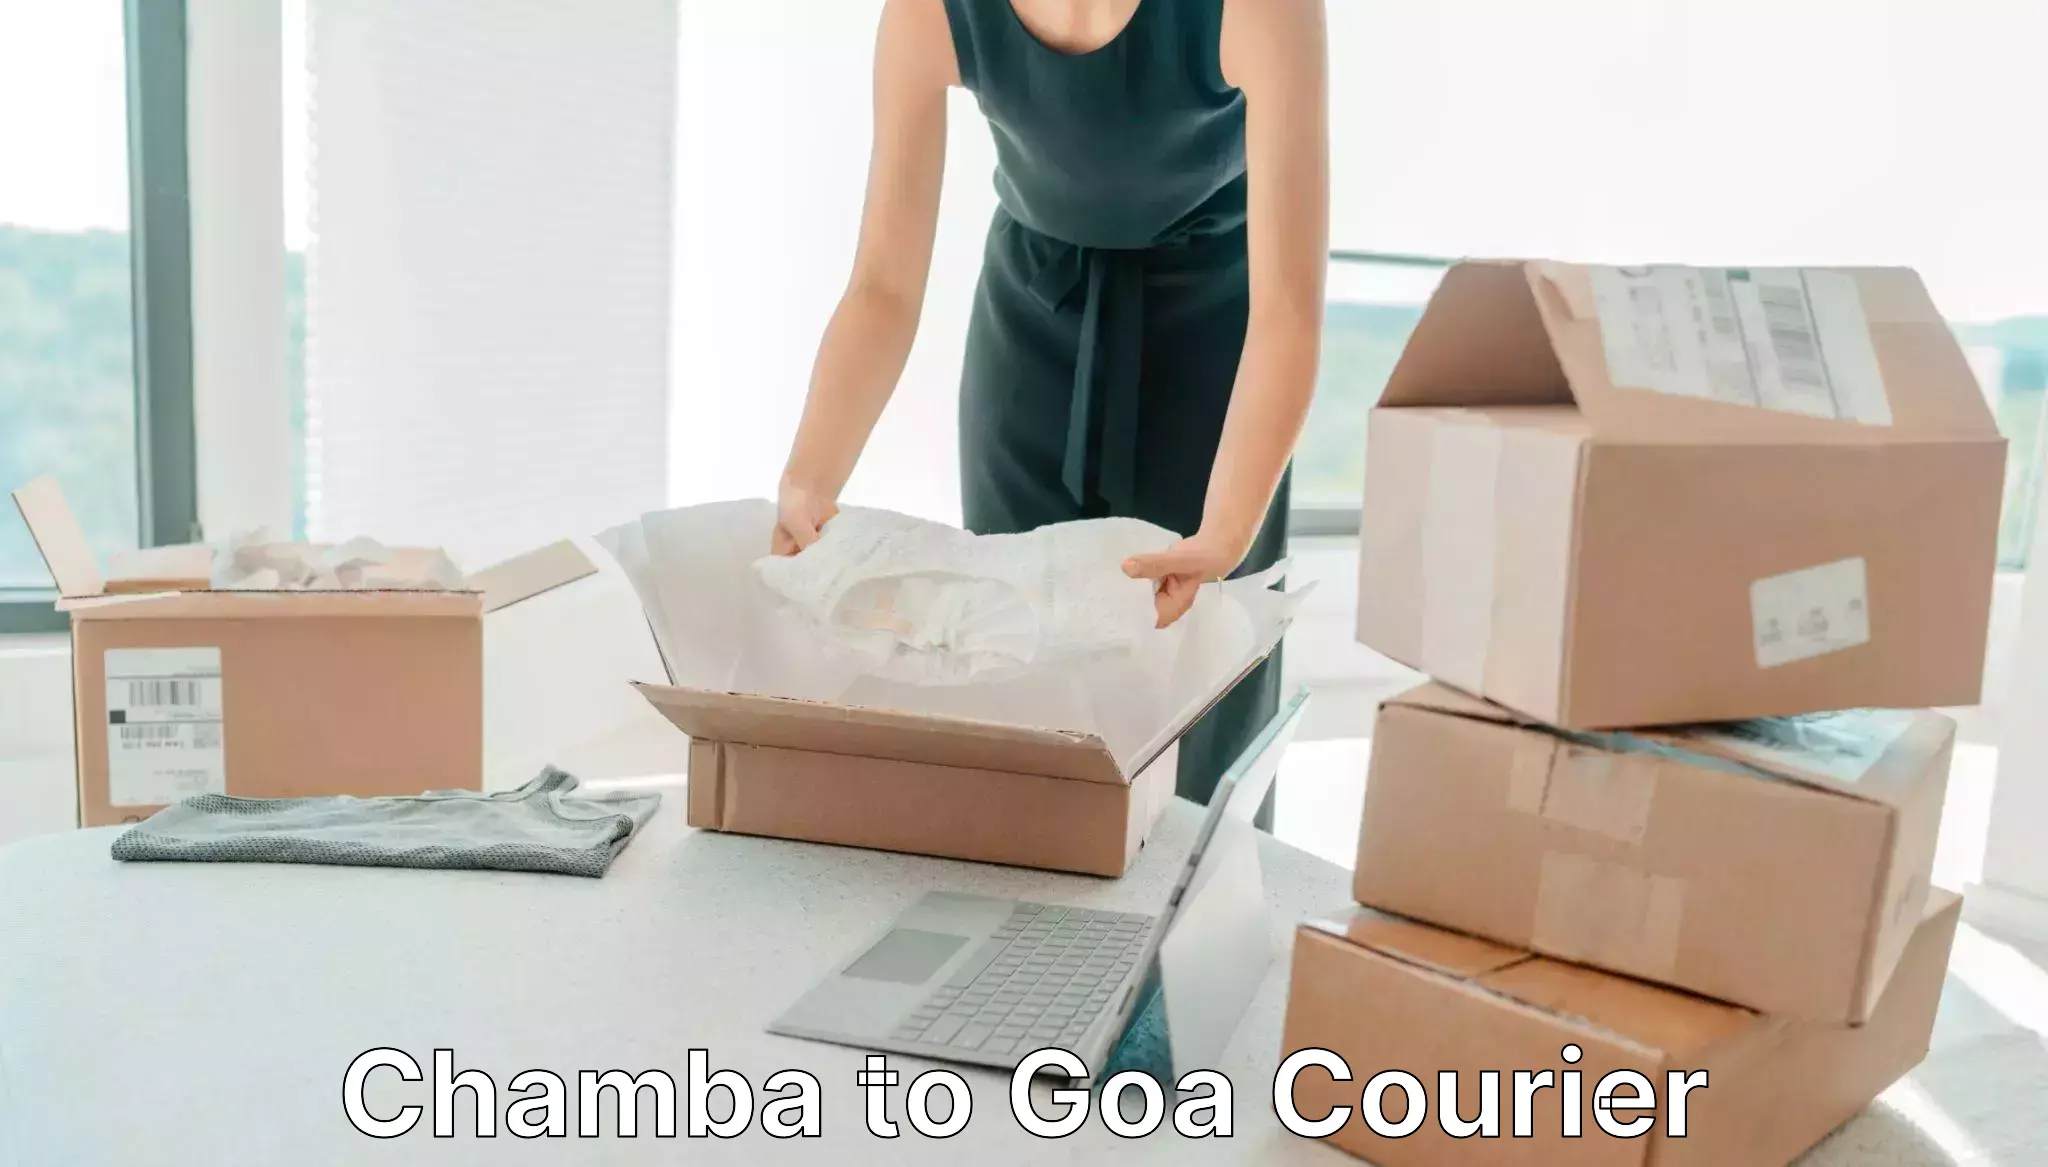 Courier service efficiency Chamba to Goa